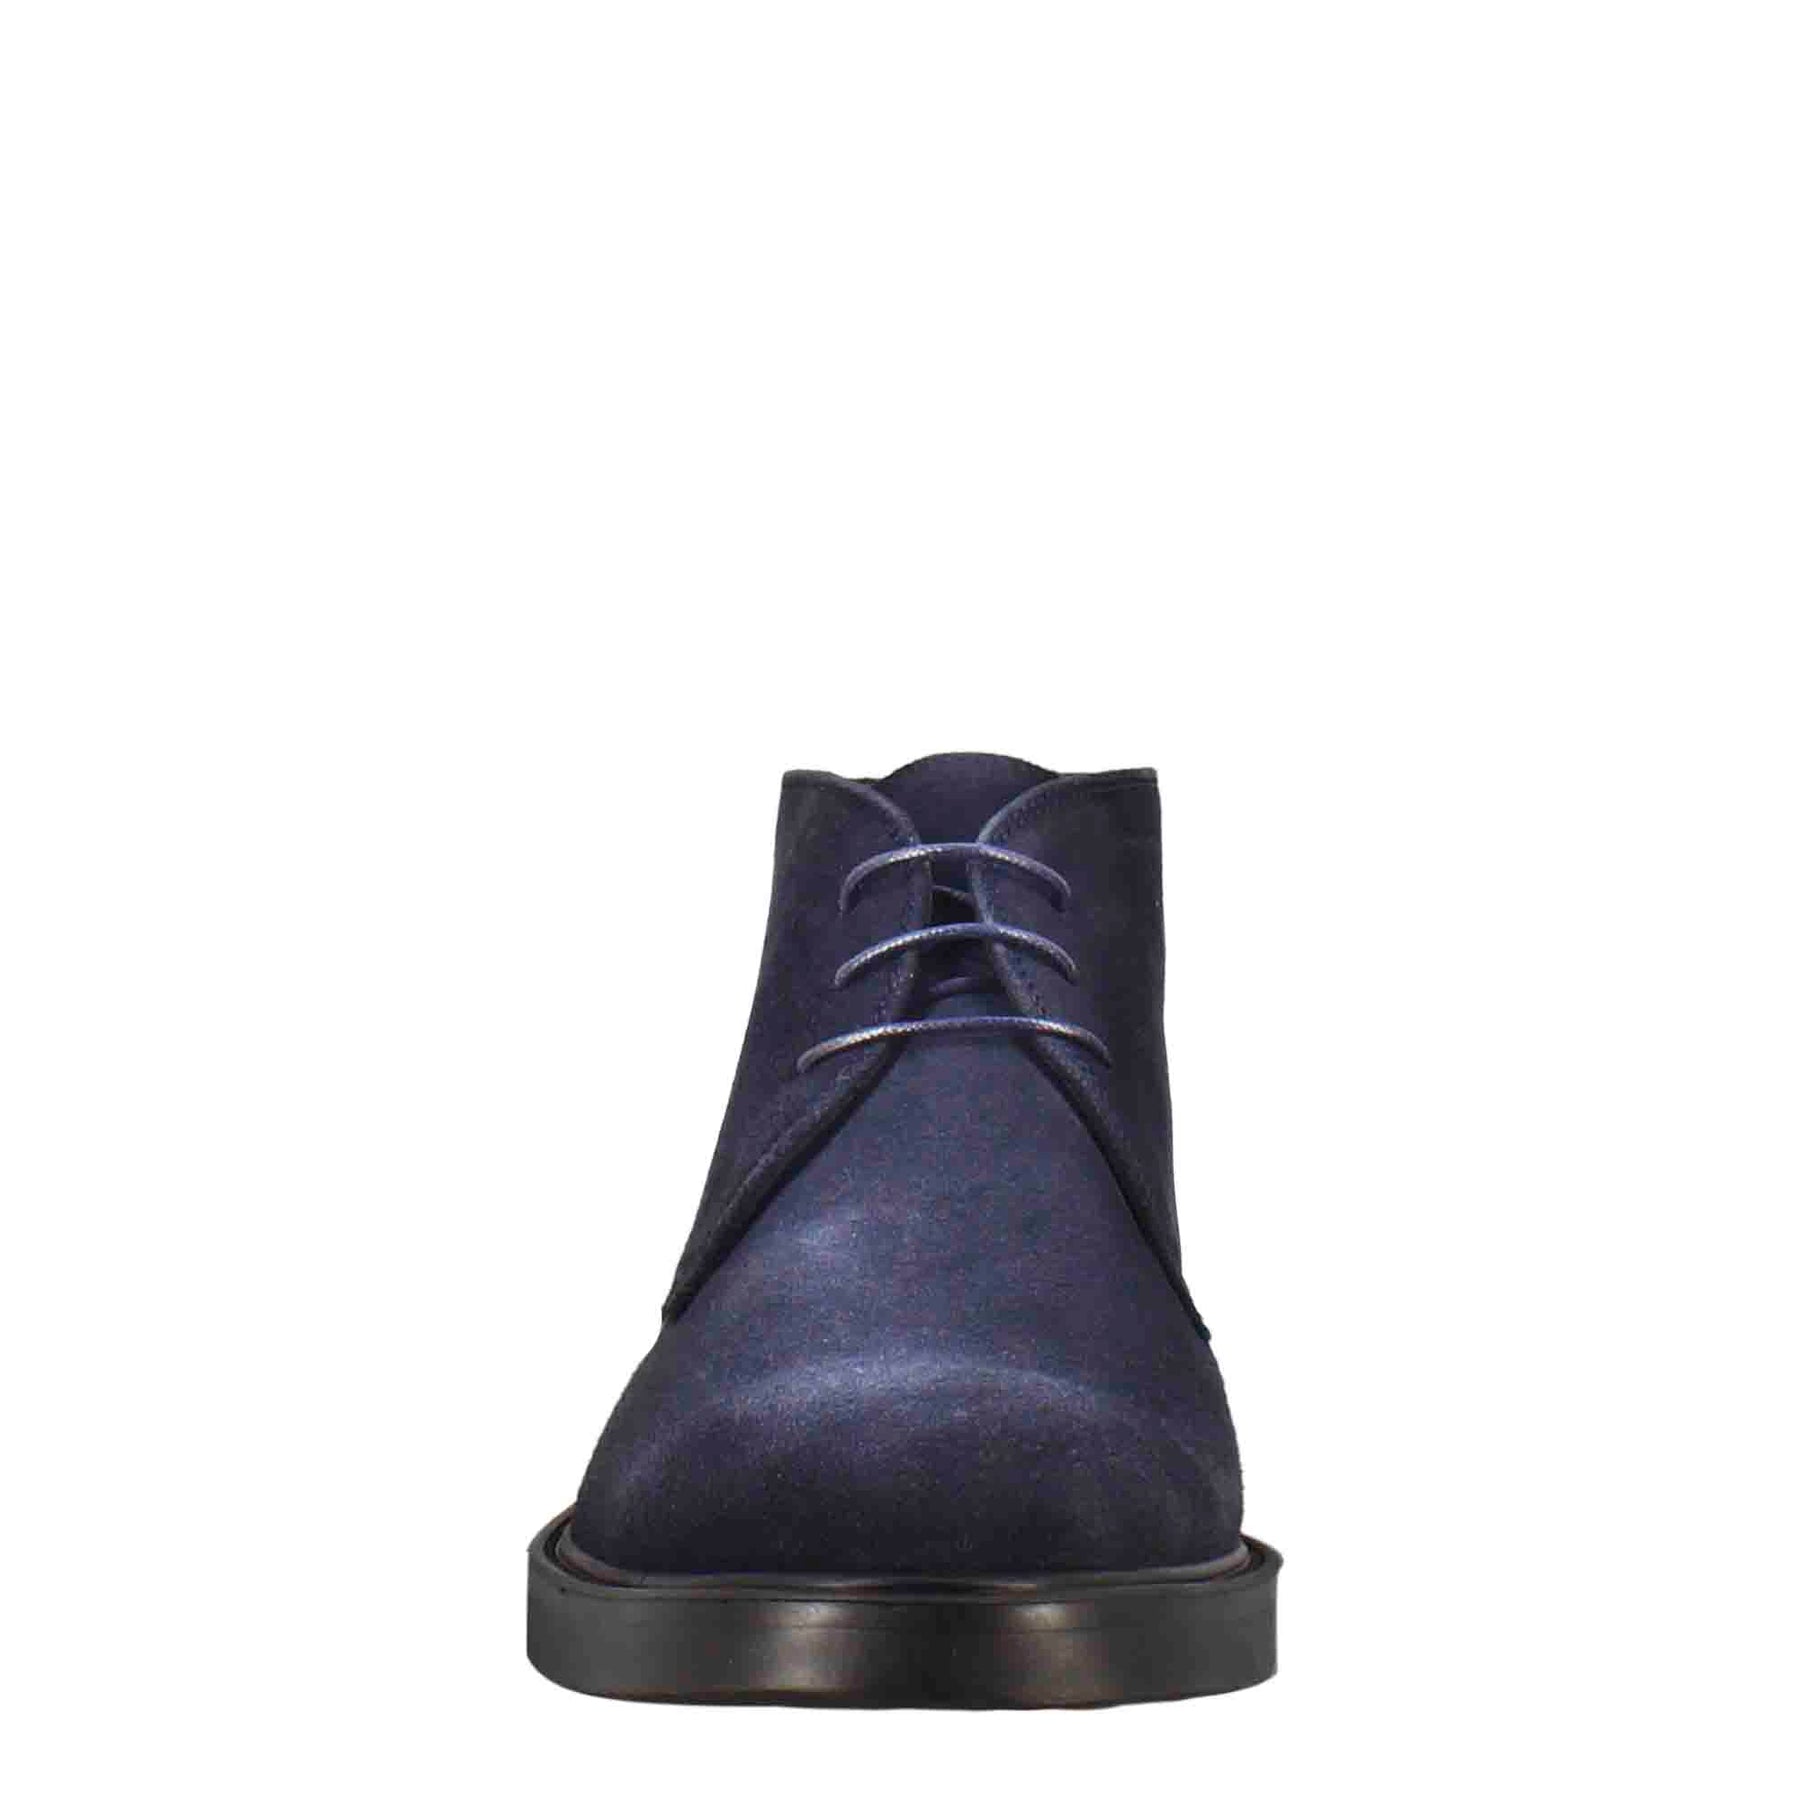 Smooth men's ankle boot in dark blue suede leather